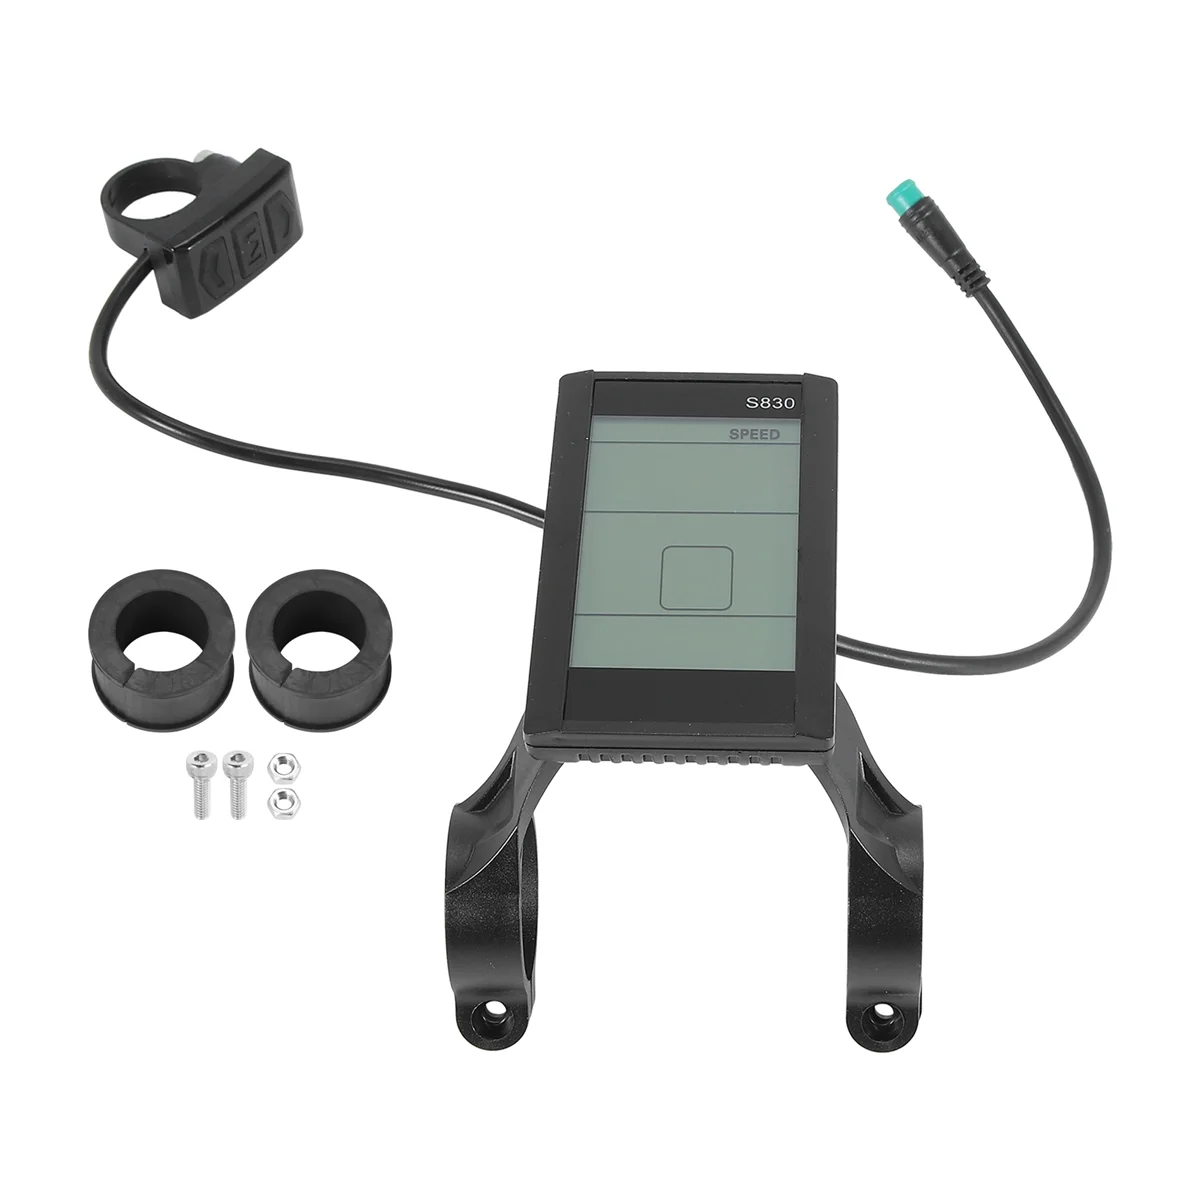 

Protocol 2 Electric Bicycle Bike Display 24V 36V 48V LCD S830 Display with USB Waterproof Connection (5 Pins)